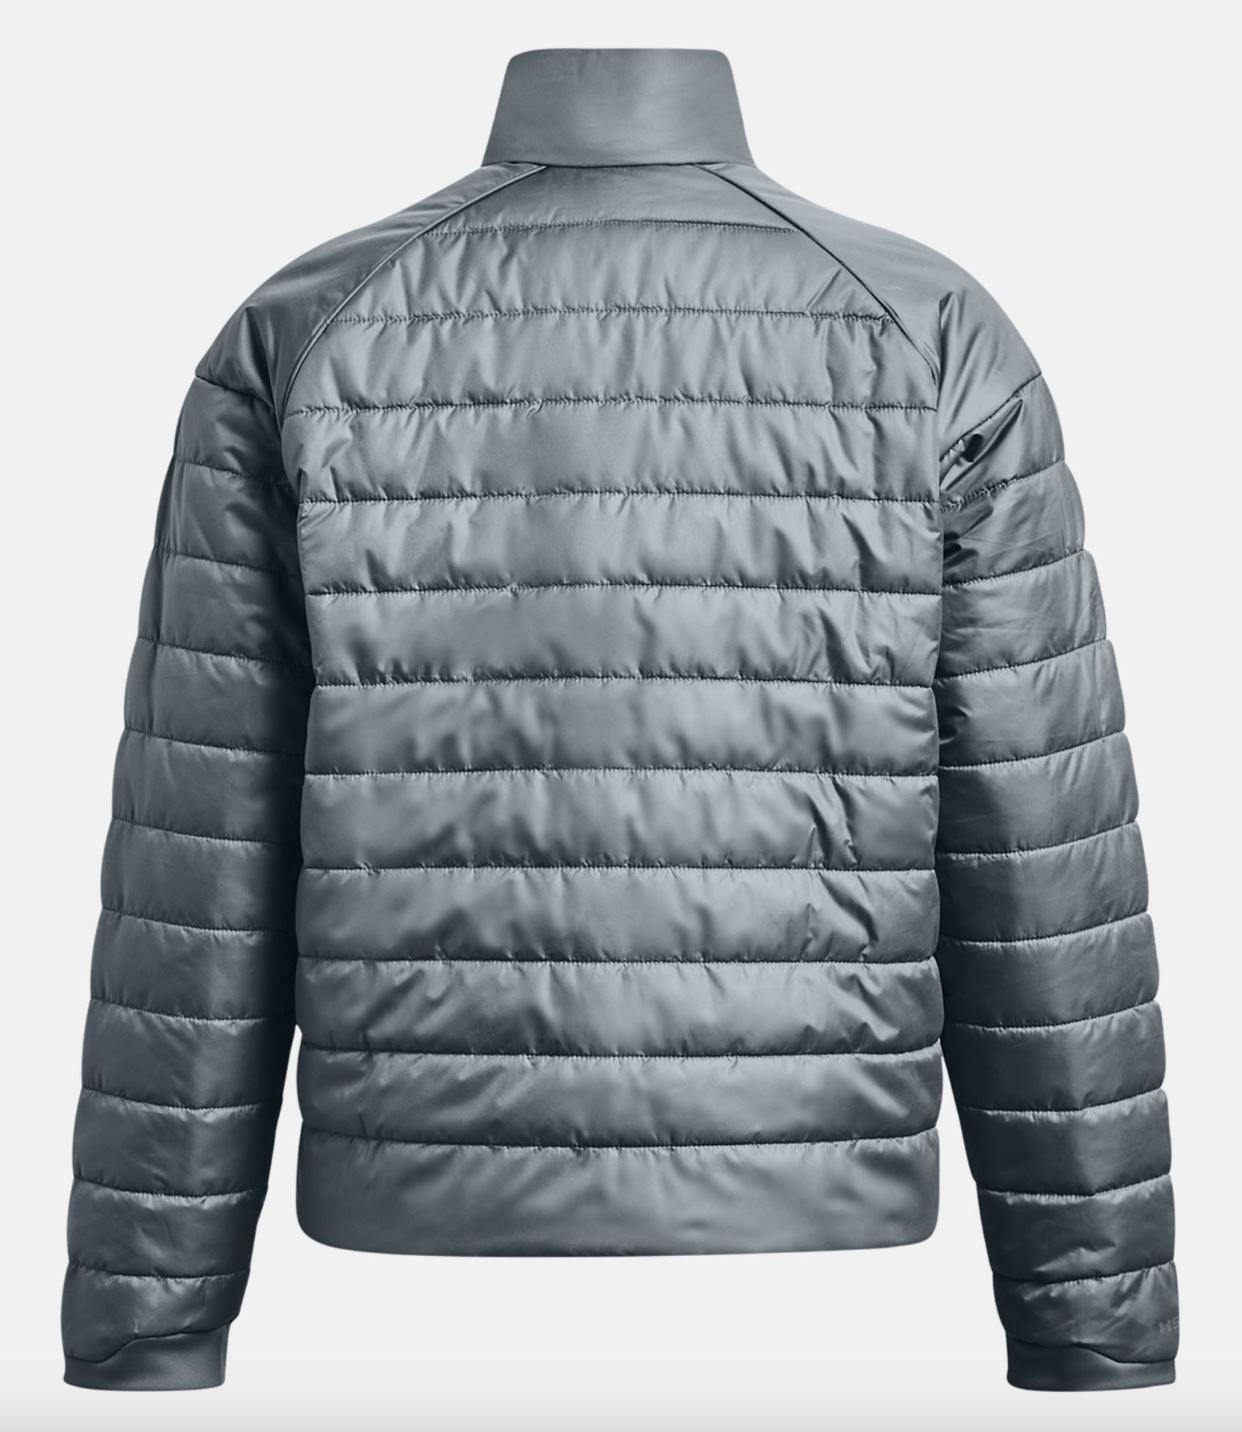 Under Armour Women's Storm Insulated Jacket | 1380875-002